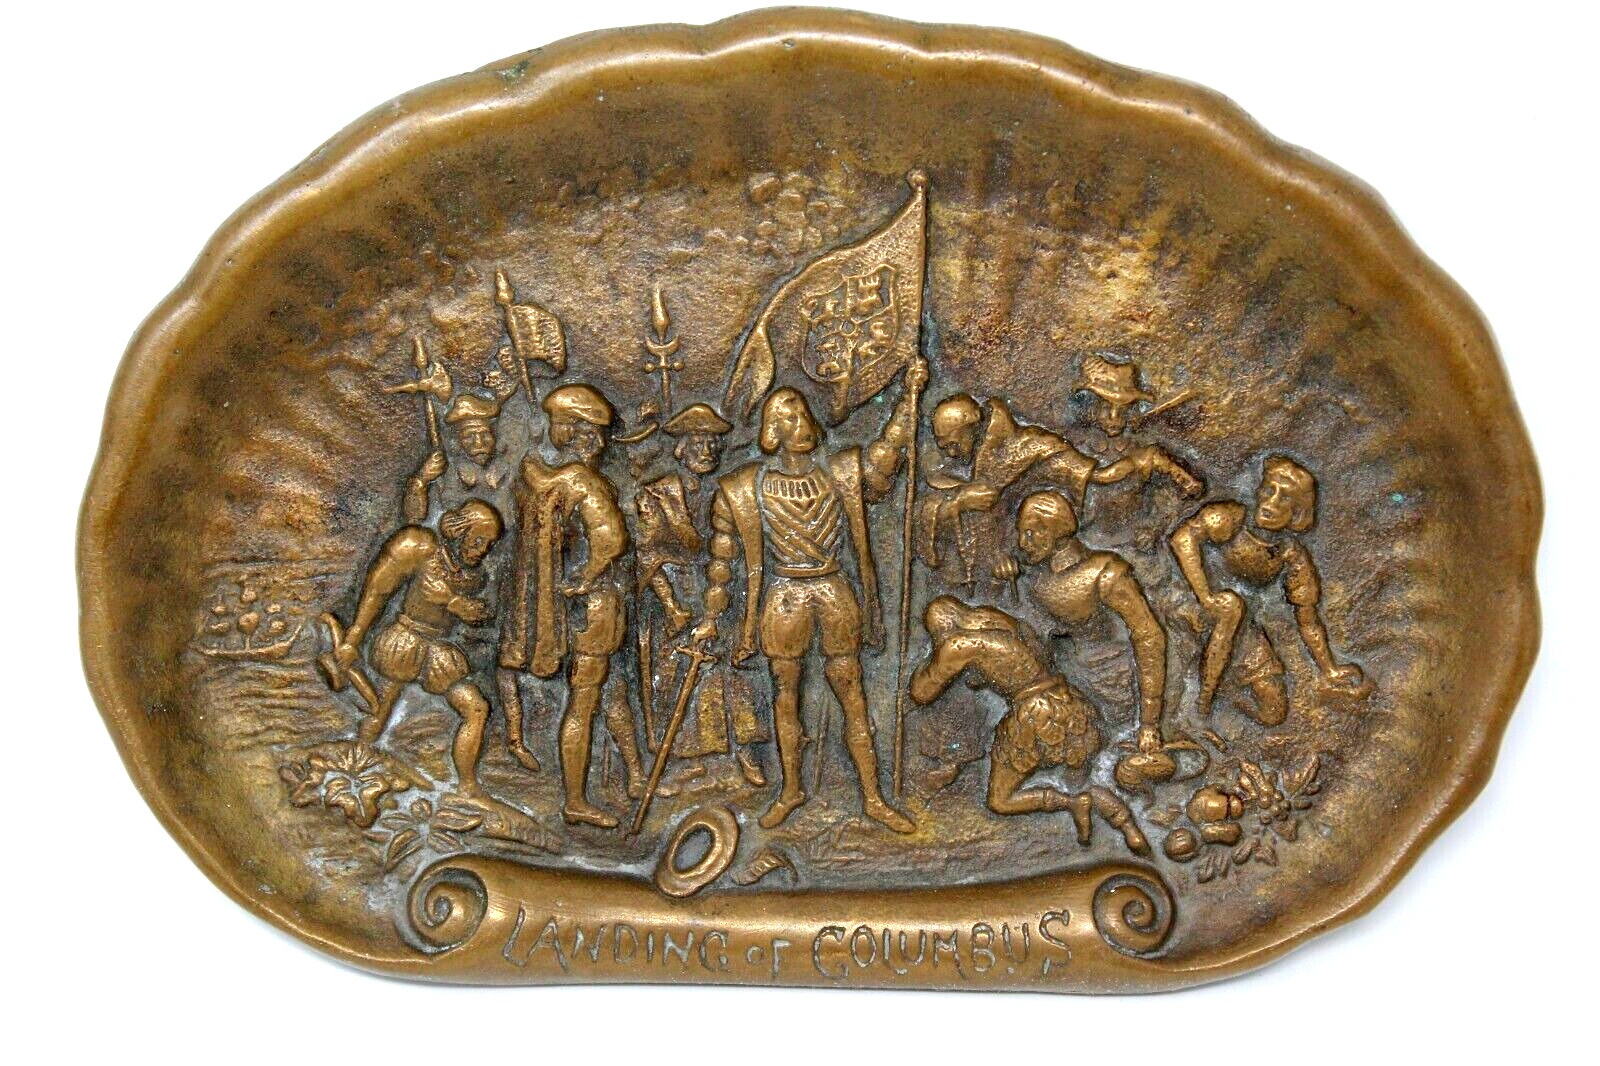 ANTIQUE SOLID BRASS LANDING OF COLUMBUS TRAY 1893 WORLD\'S COLUMBIAN EXPOSITION